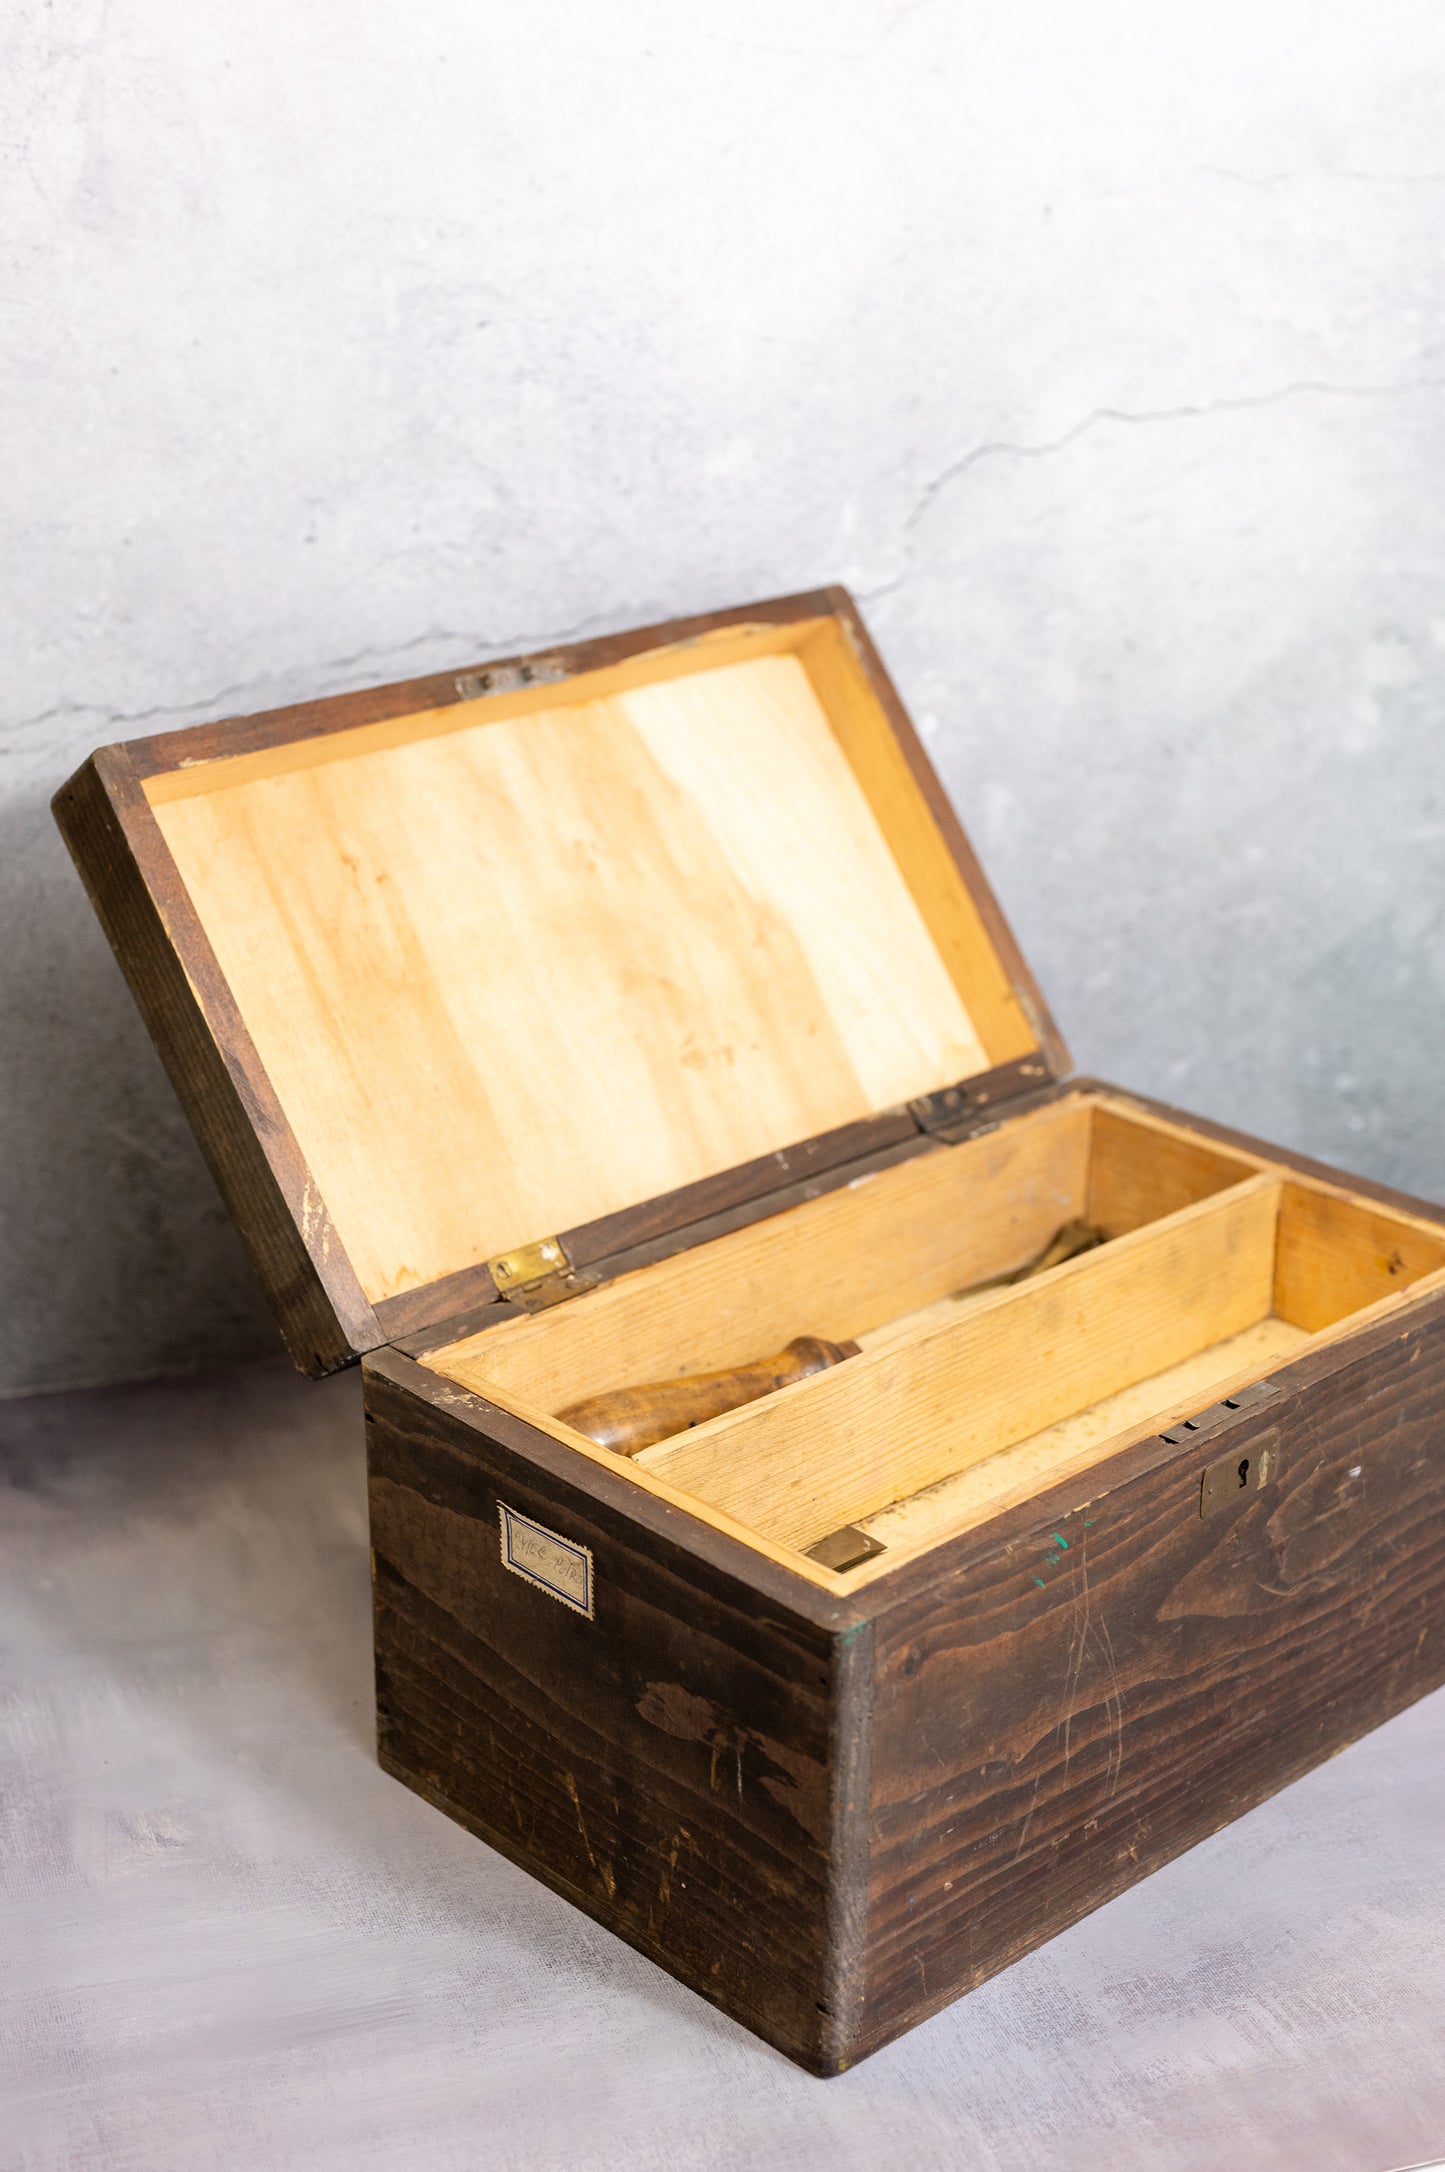 Stone burnisher toolbox for gold and silver leaf